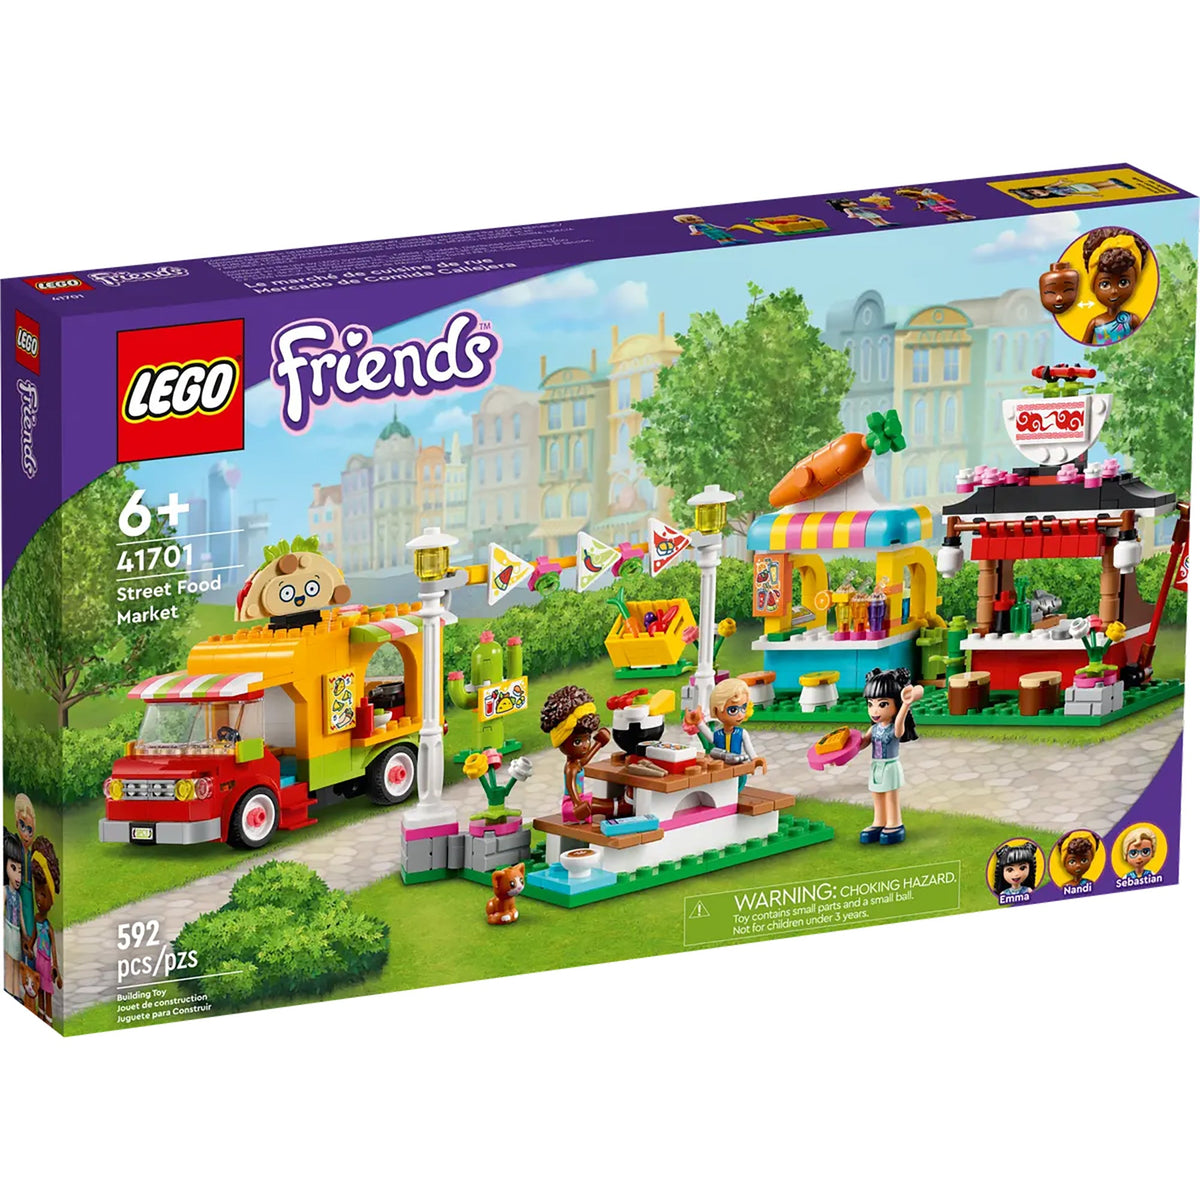 LEGO Toys & Games LEGO Street Food Market, 41701, Ages 6+, 592 Pieces 673419359535